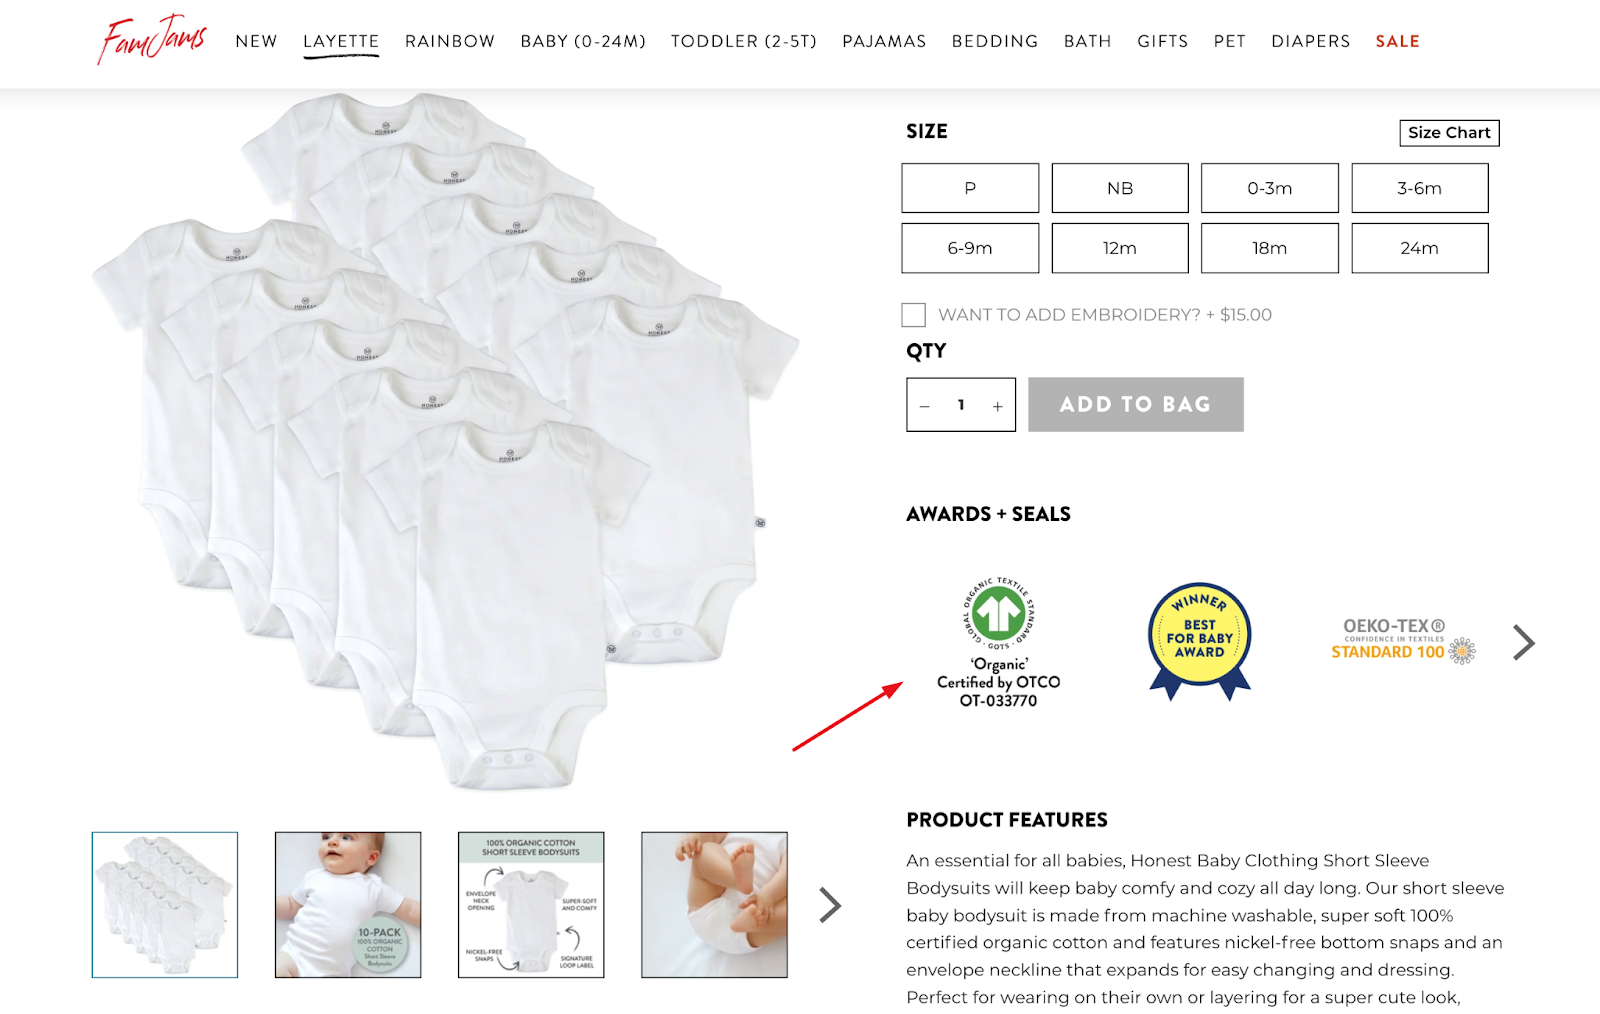 12 Mistakes To Avoid When Building An E-Commerce Brand - Inkbot Design